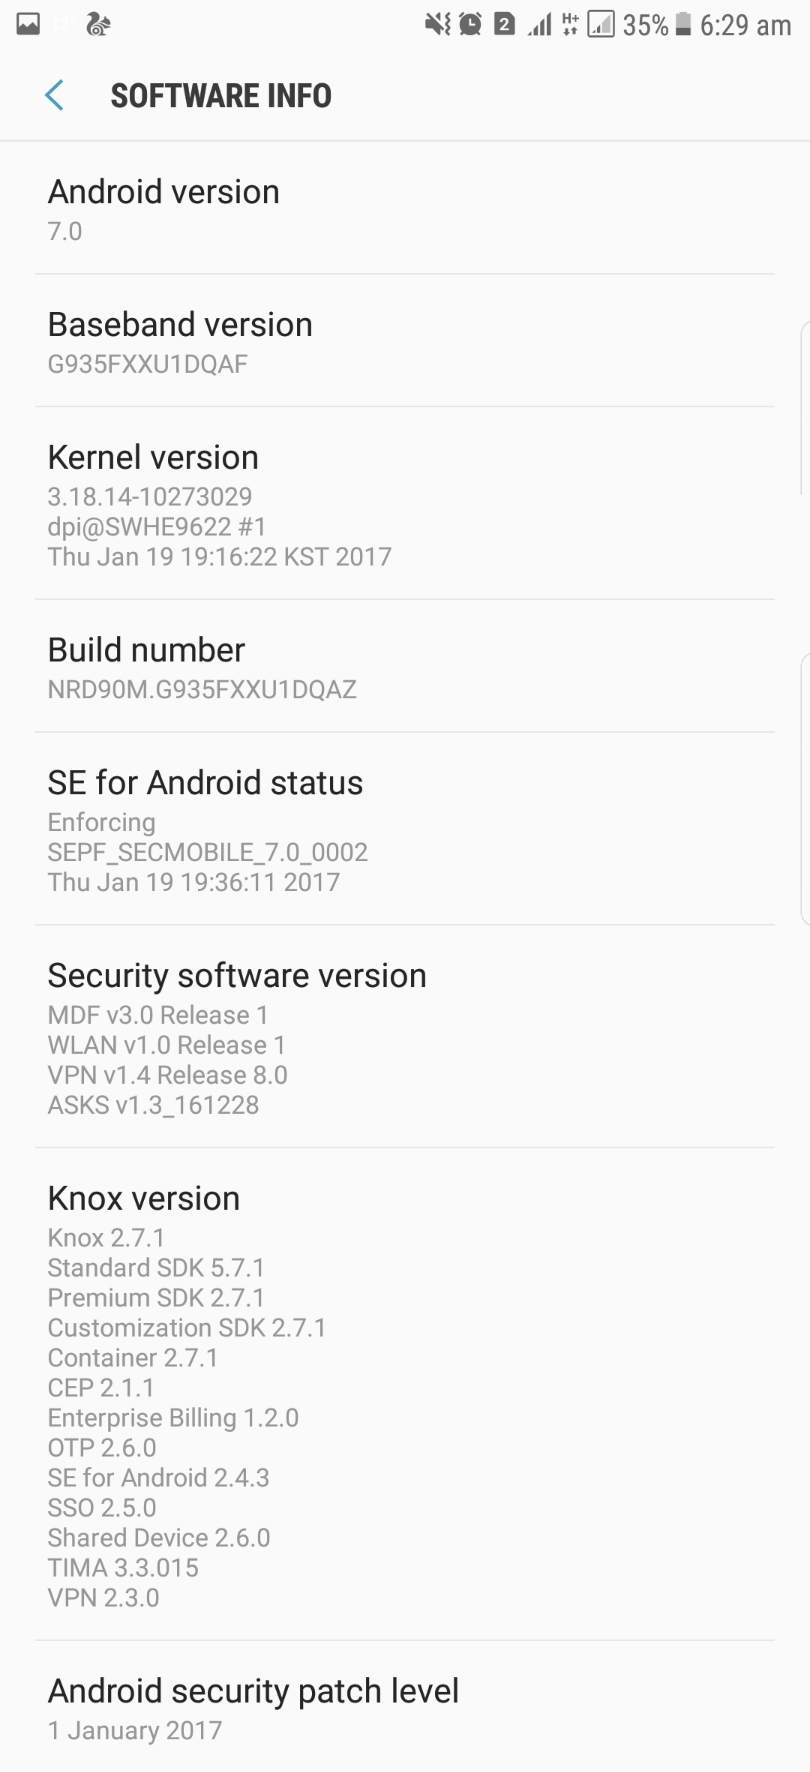 Android 7.0 Nougat Galaxy S7 Edge January security patch